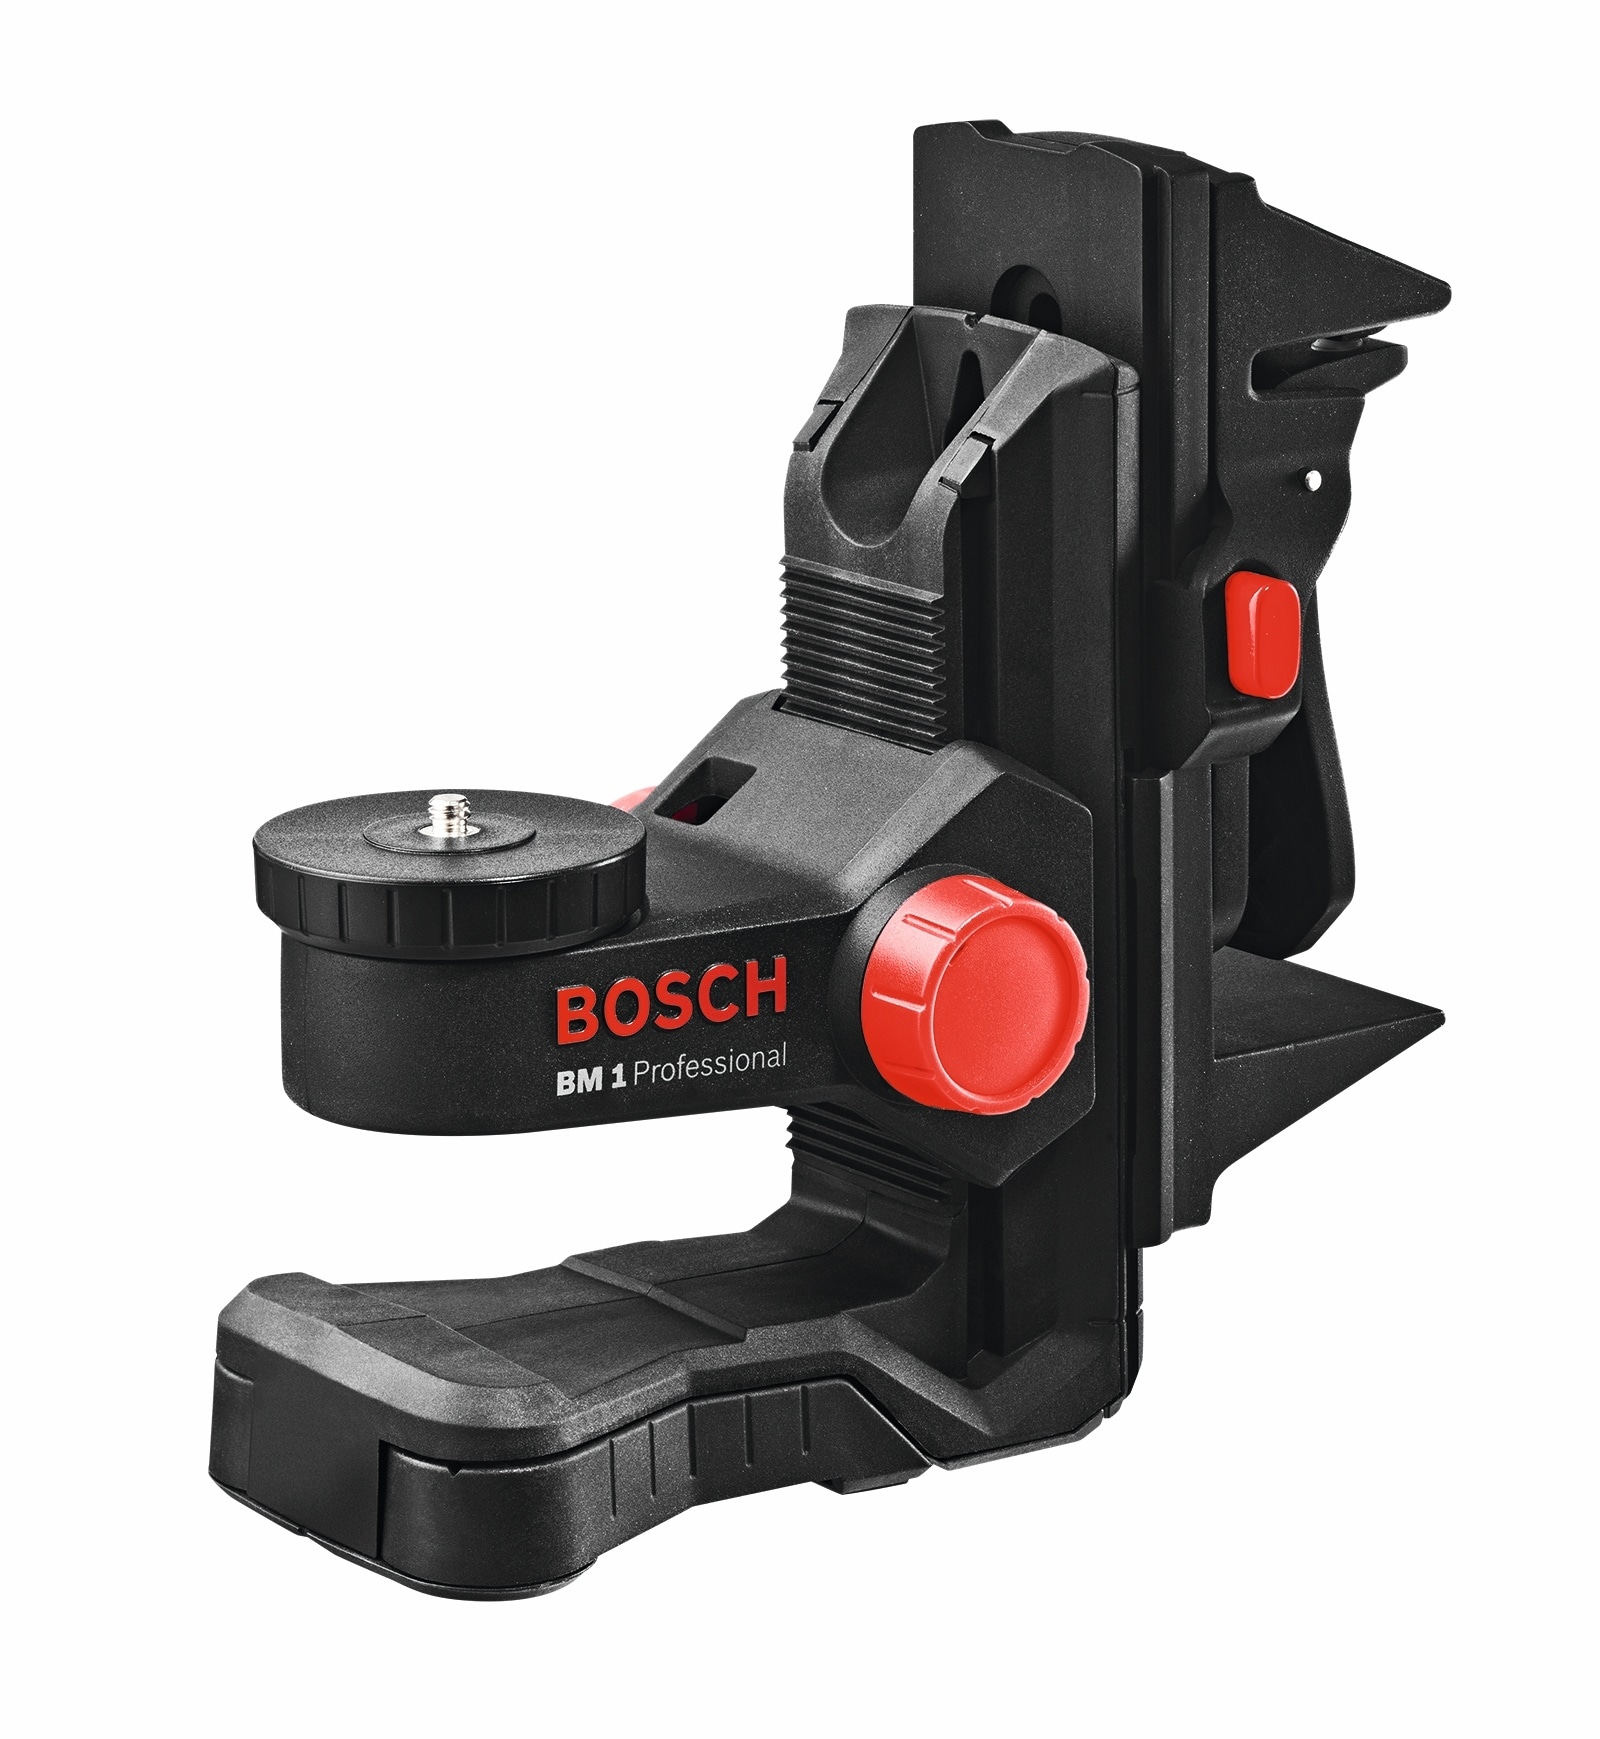 BOSCH Pole System Level Positioning Measuring Tool W/ 1/4" to 20" Thread Mount 